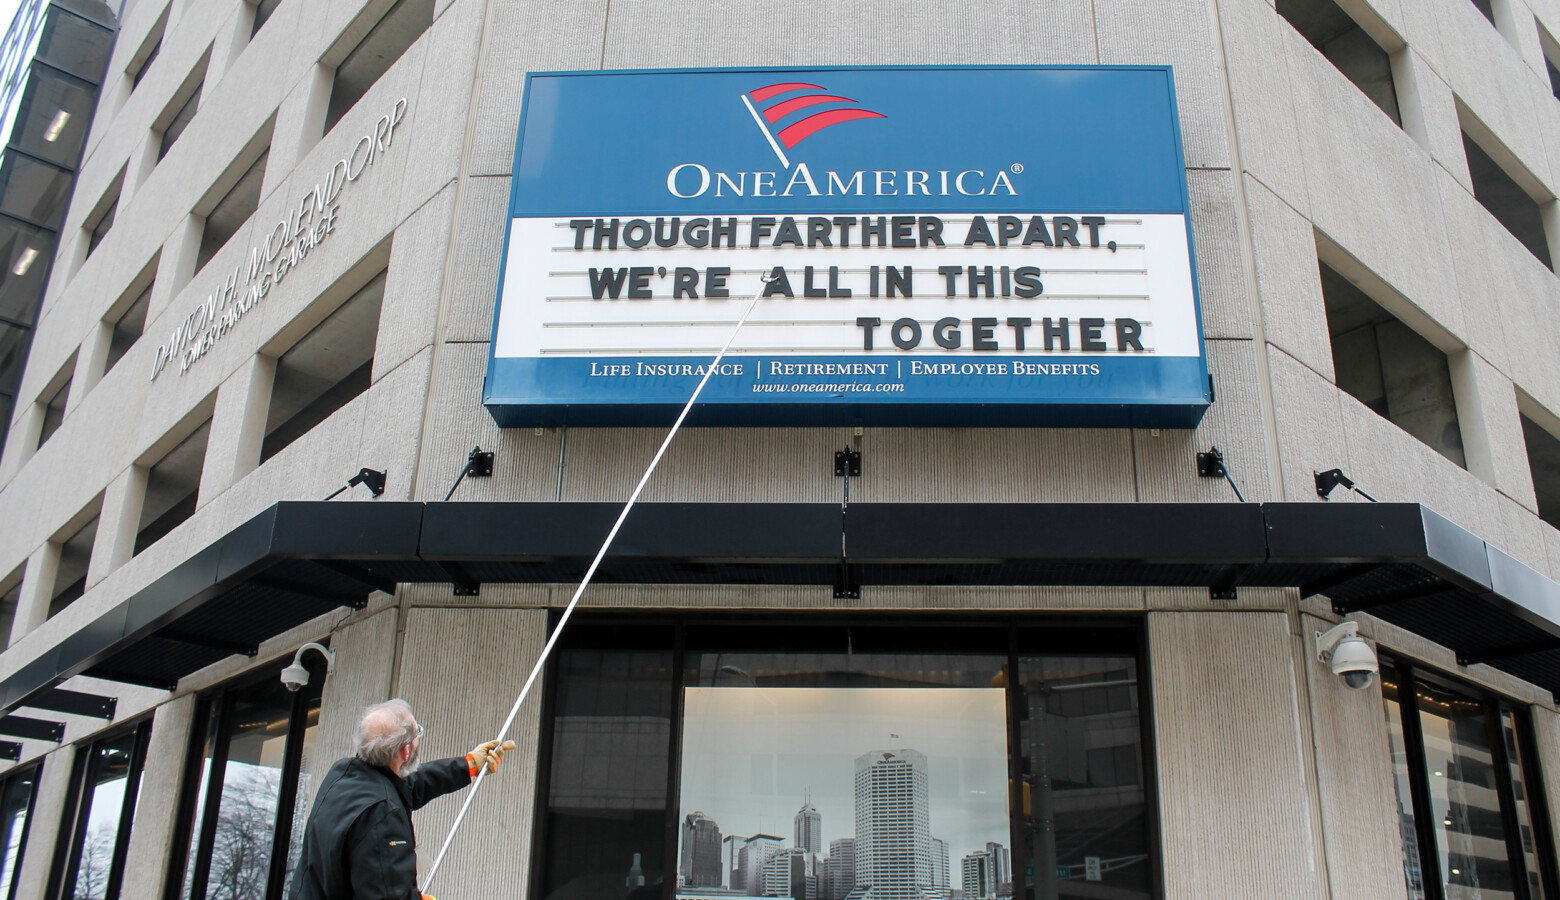 A man adjusts the One America sign in downtown Indianapolis. It usually displays a pun, but the message shortly before the governor's address reads: "Although father apart, we're all in this together." (Lauren Chapman/IPB News)